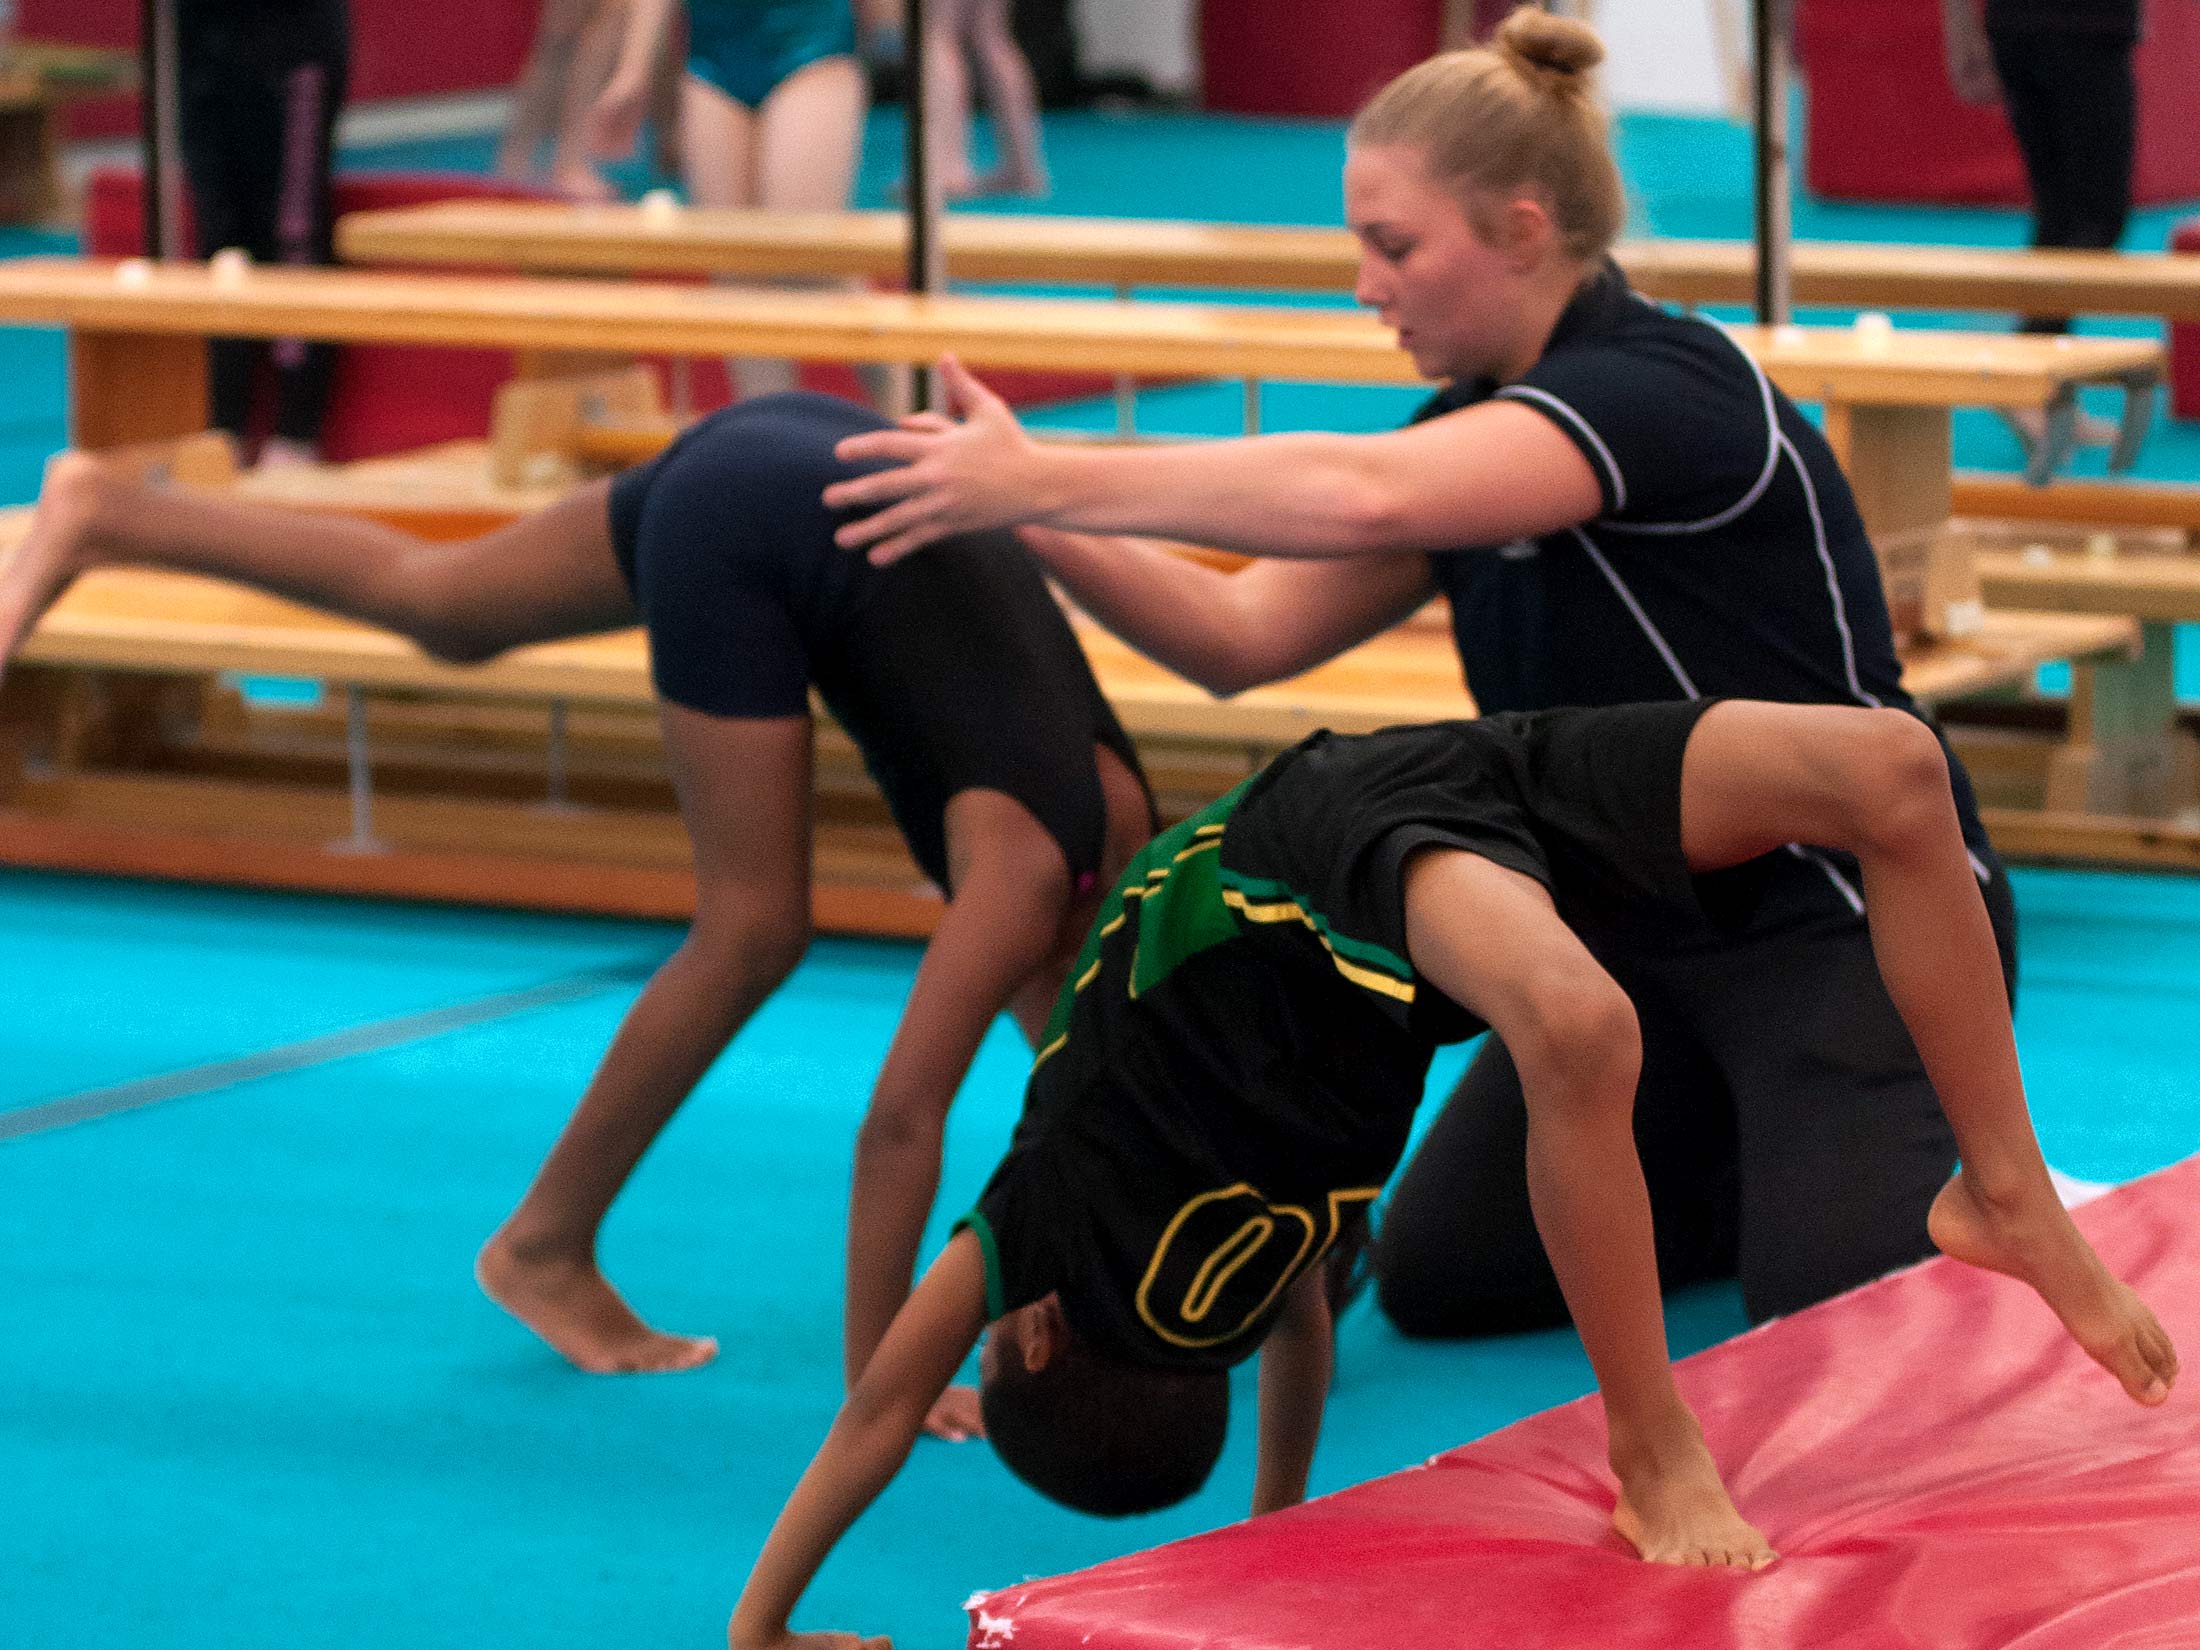 gymnasts being coached to handstand